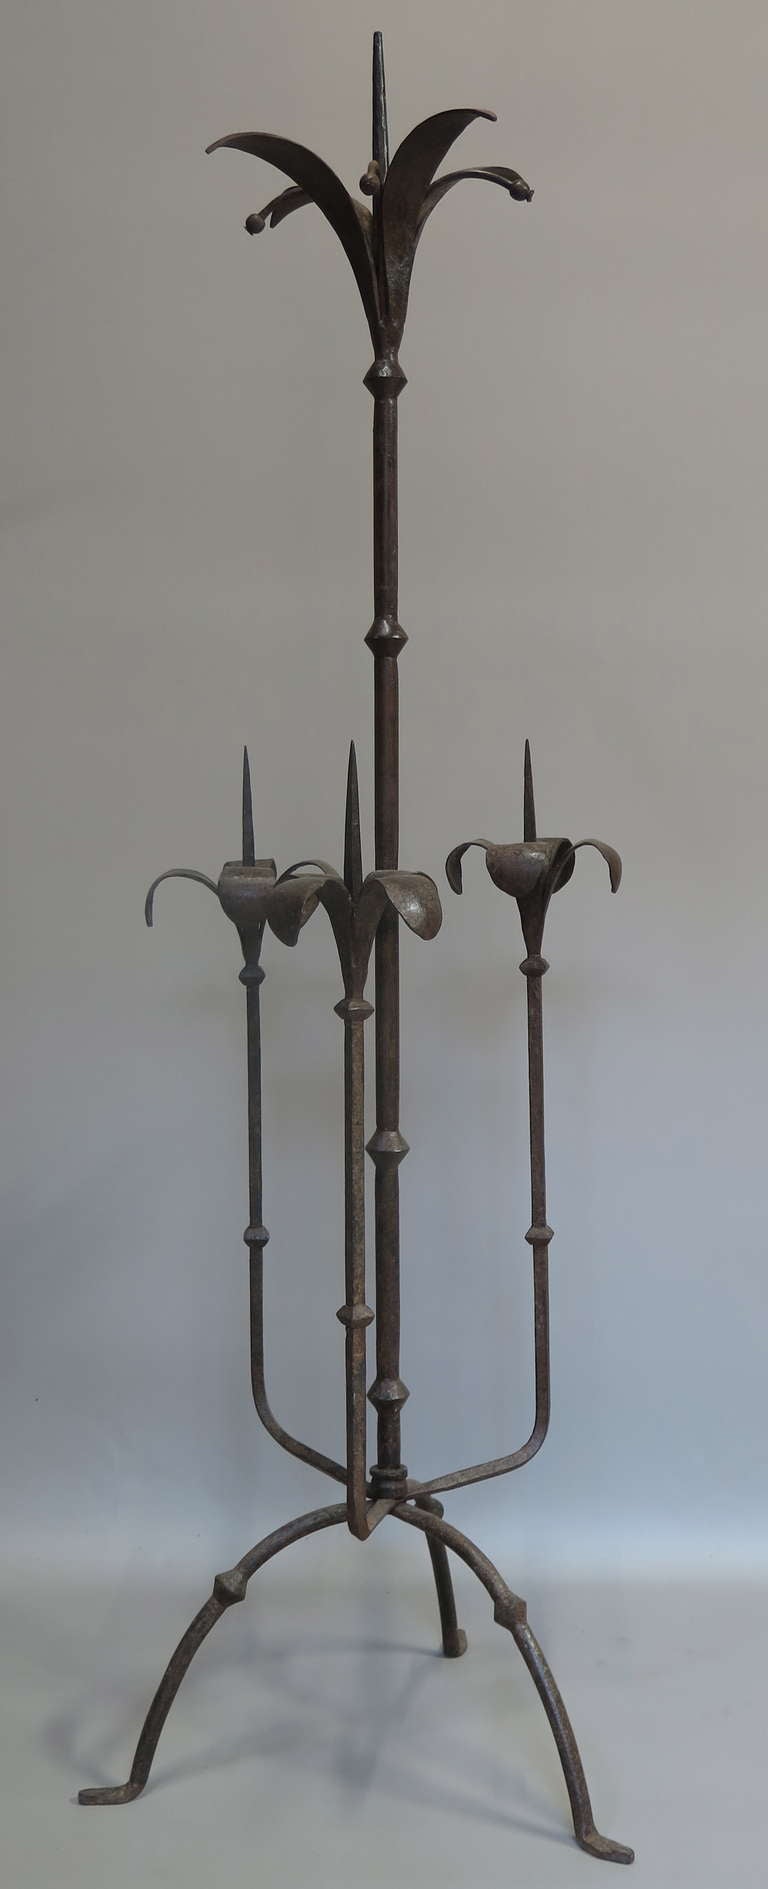 Hand-wrought iron candelabra with fleur-de-lys candle holders.